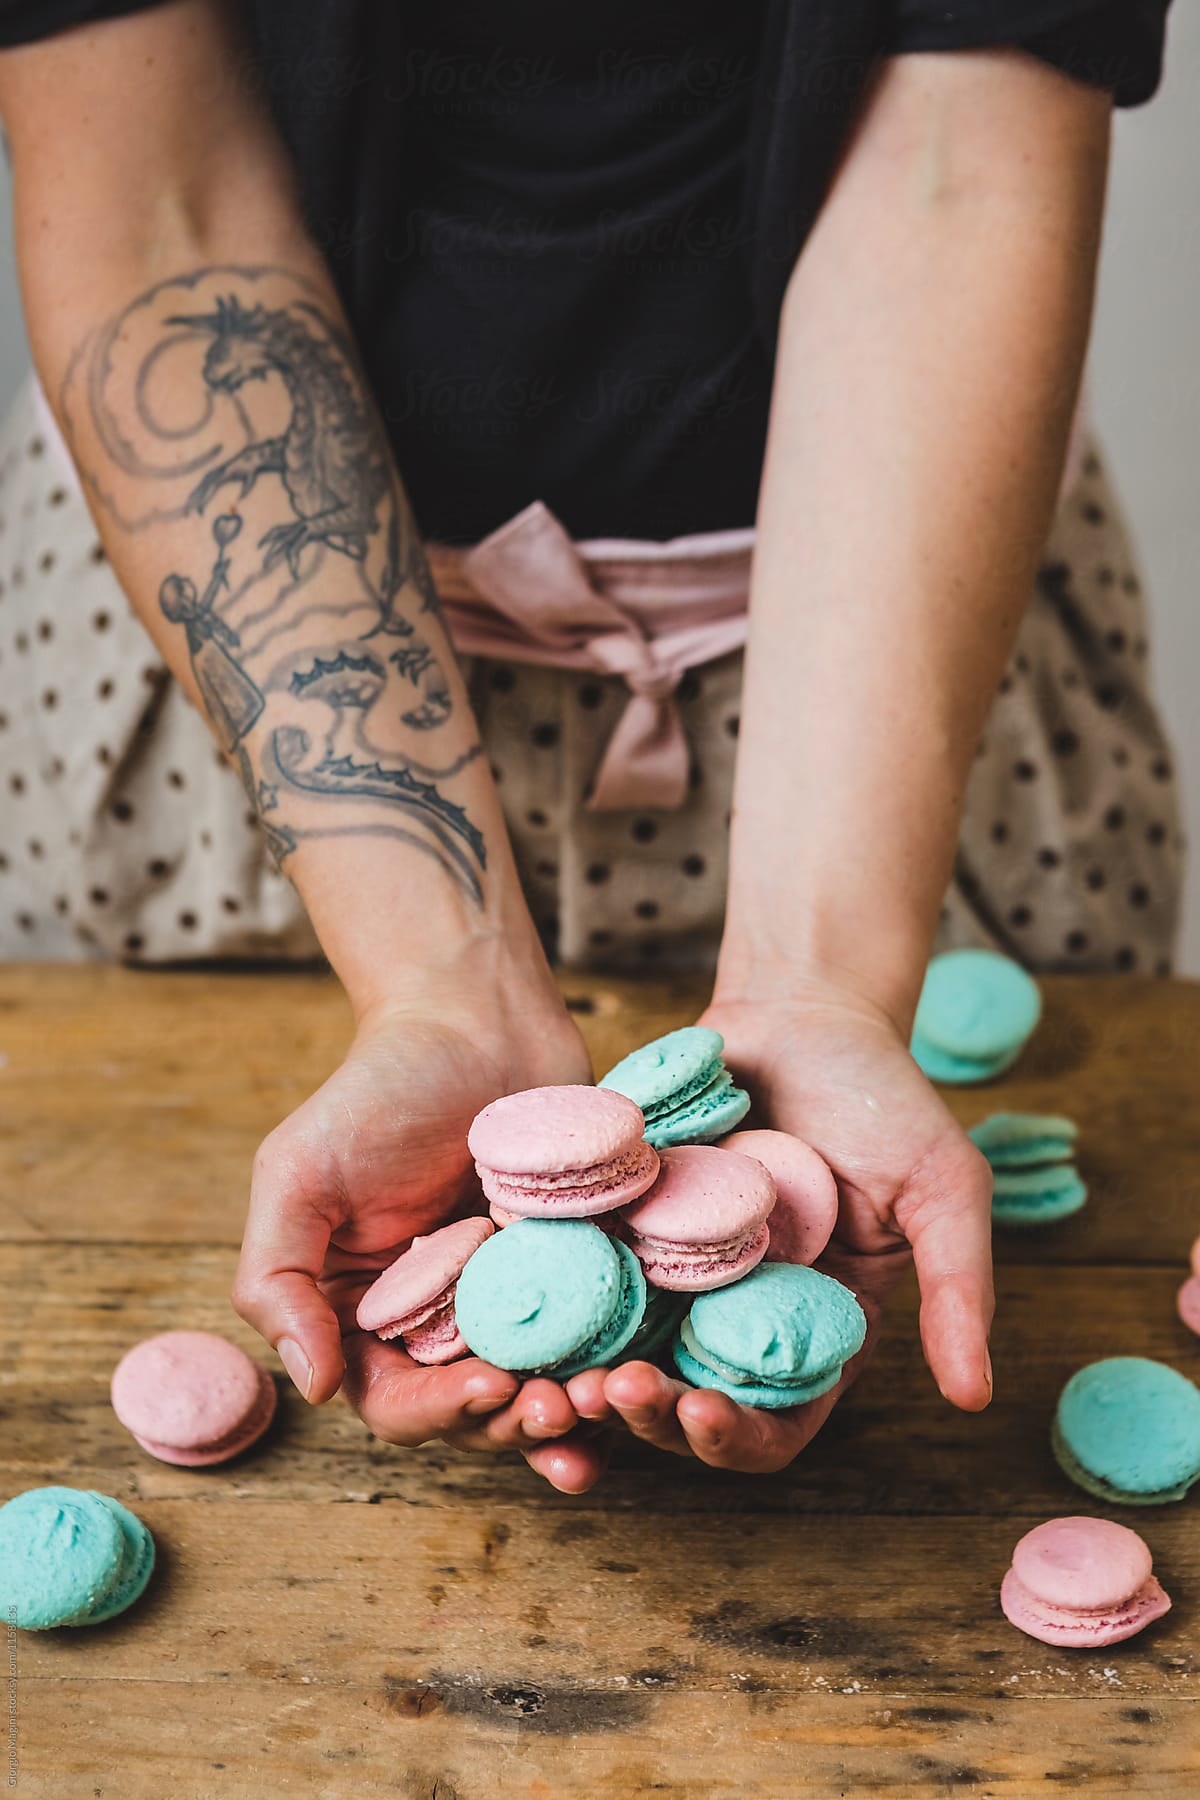 Woman Showing Colored Macarons on a Wooden Table